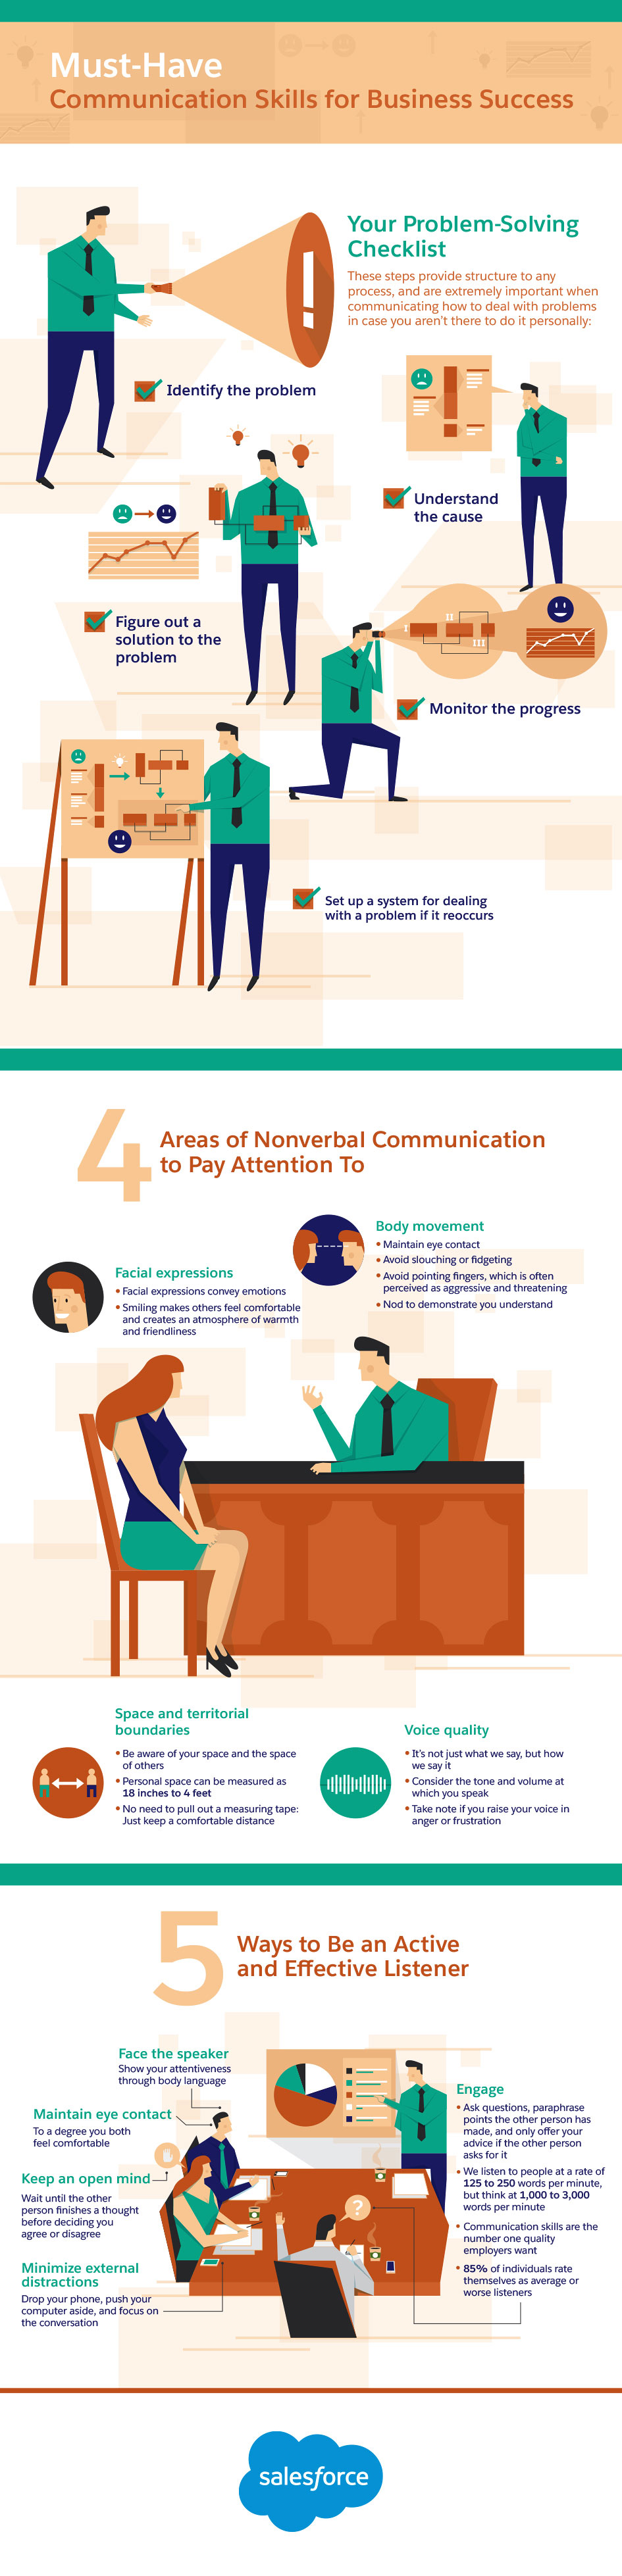 10 Must-Have Communication Skills for Business Success